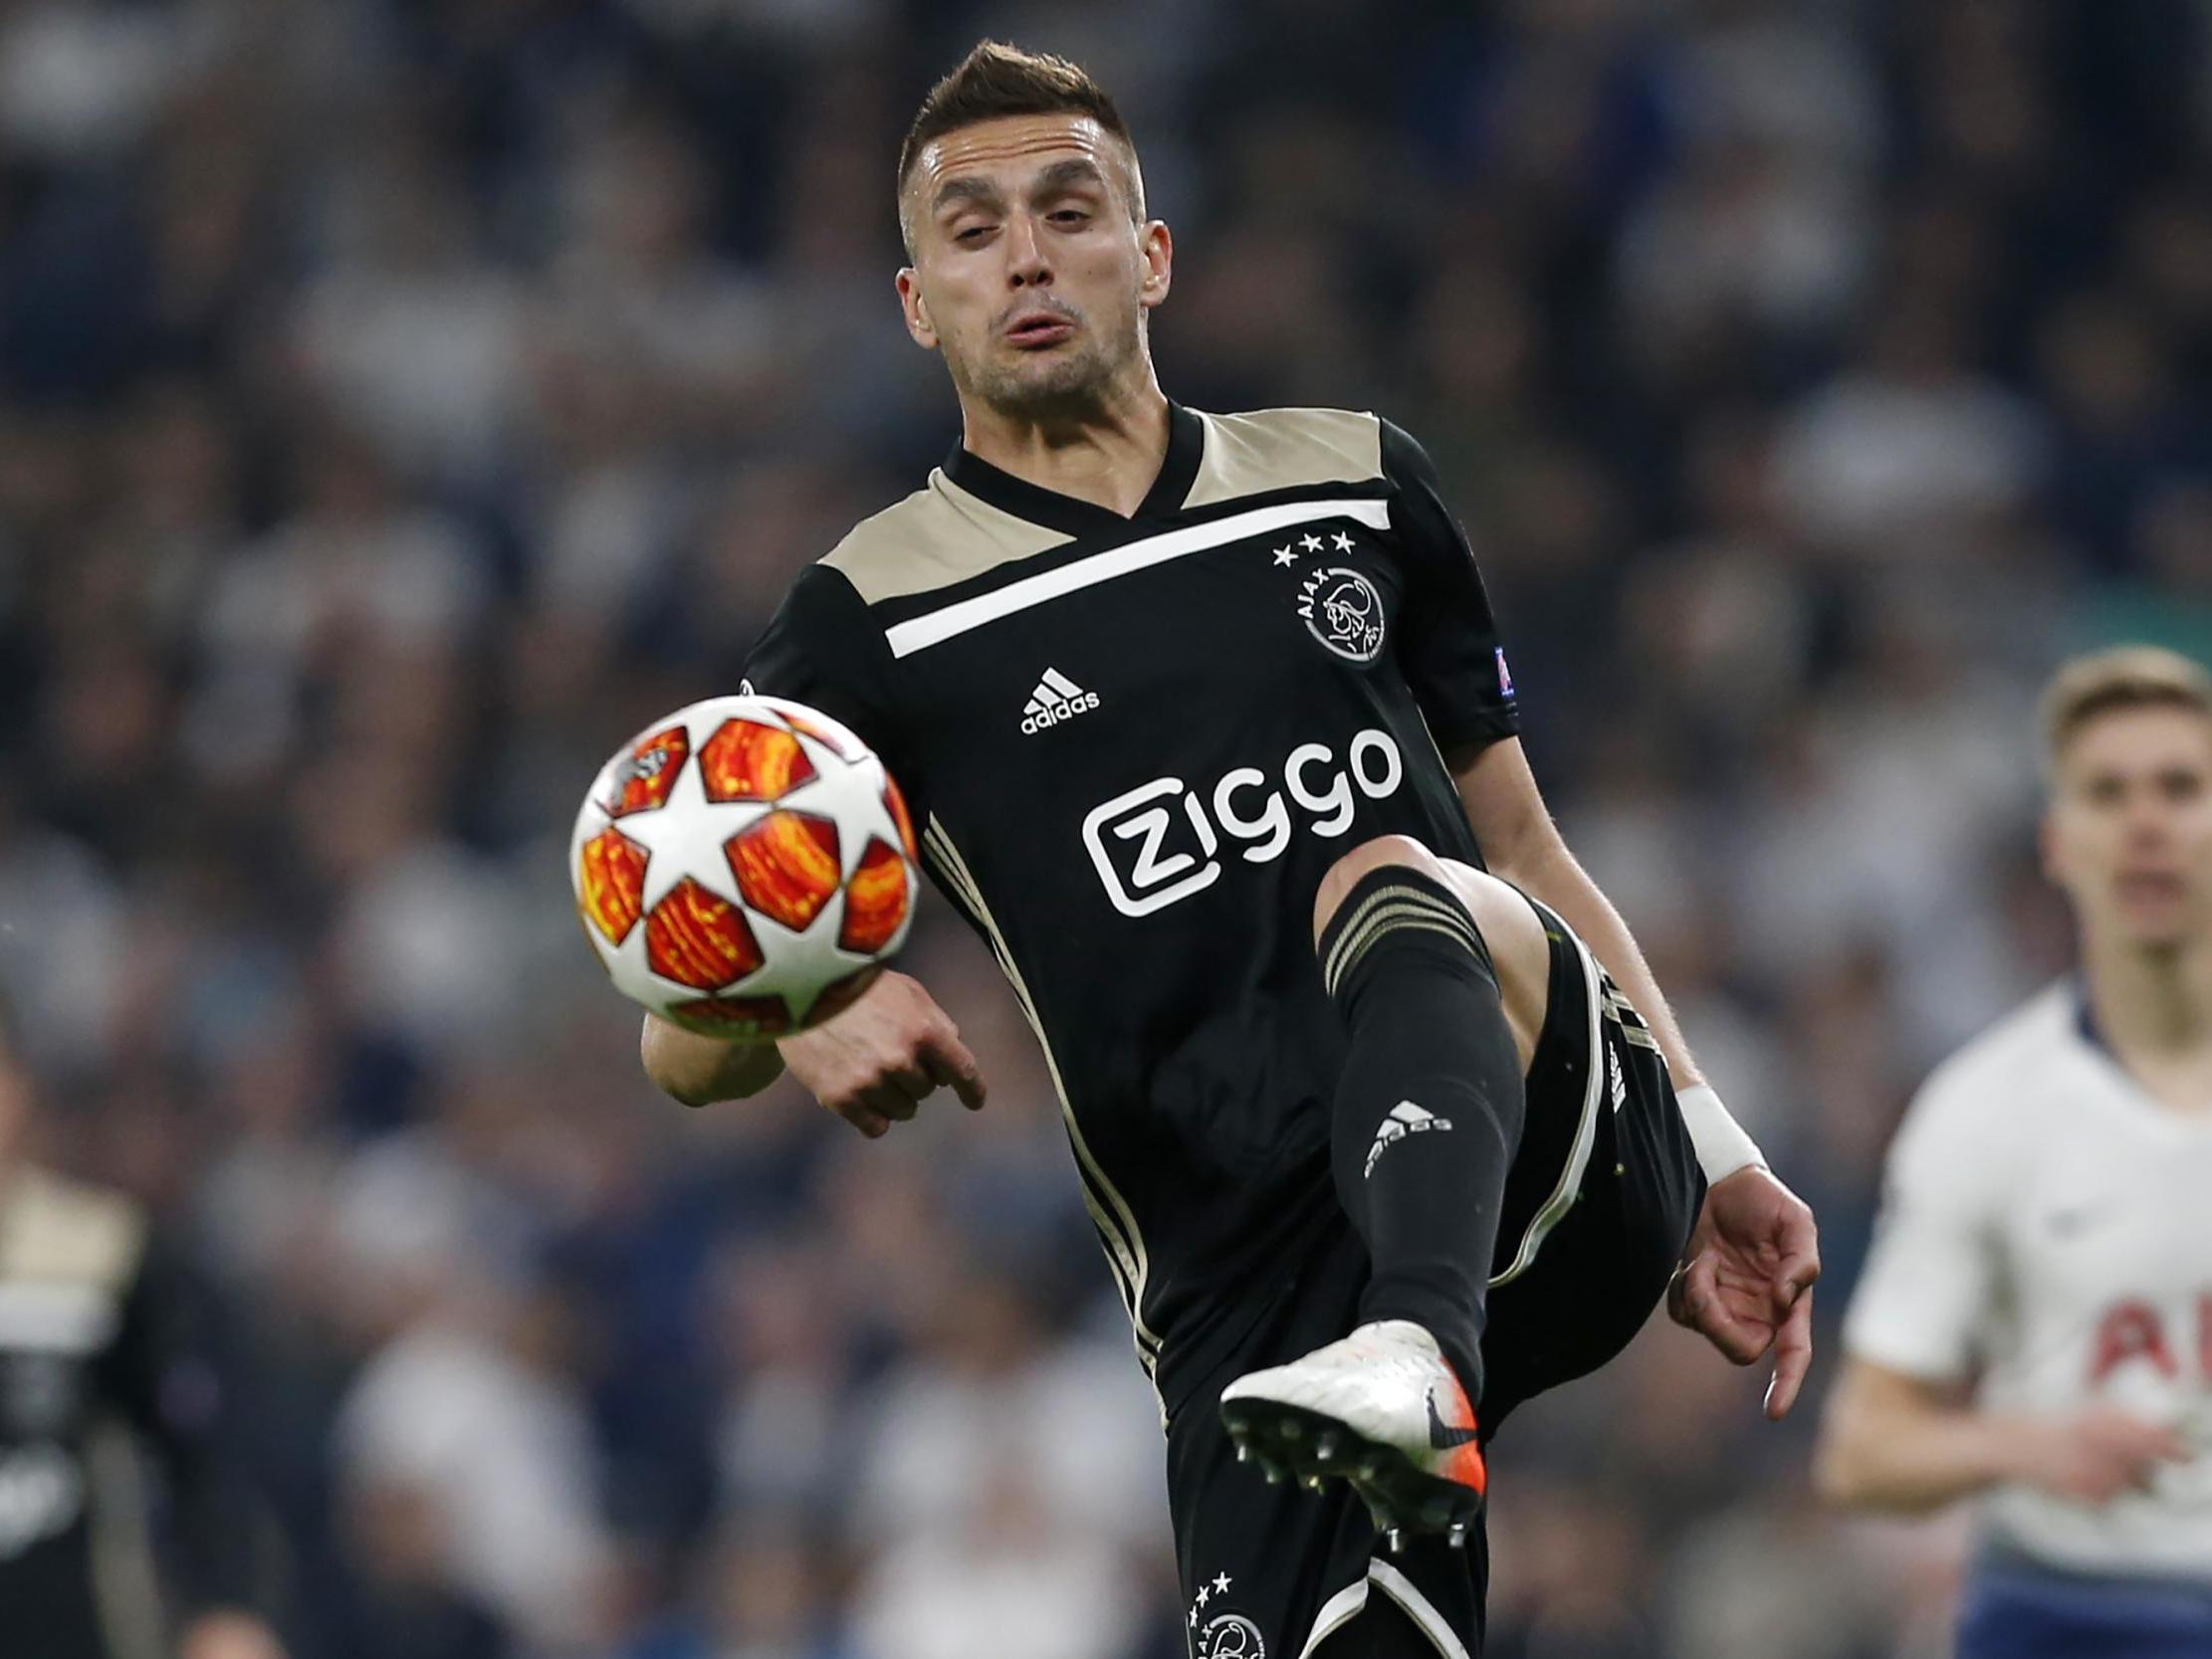 Tadic has admitted that nobody thought Ajax would reach this stage of the Champions League